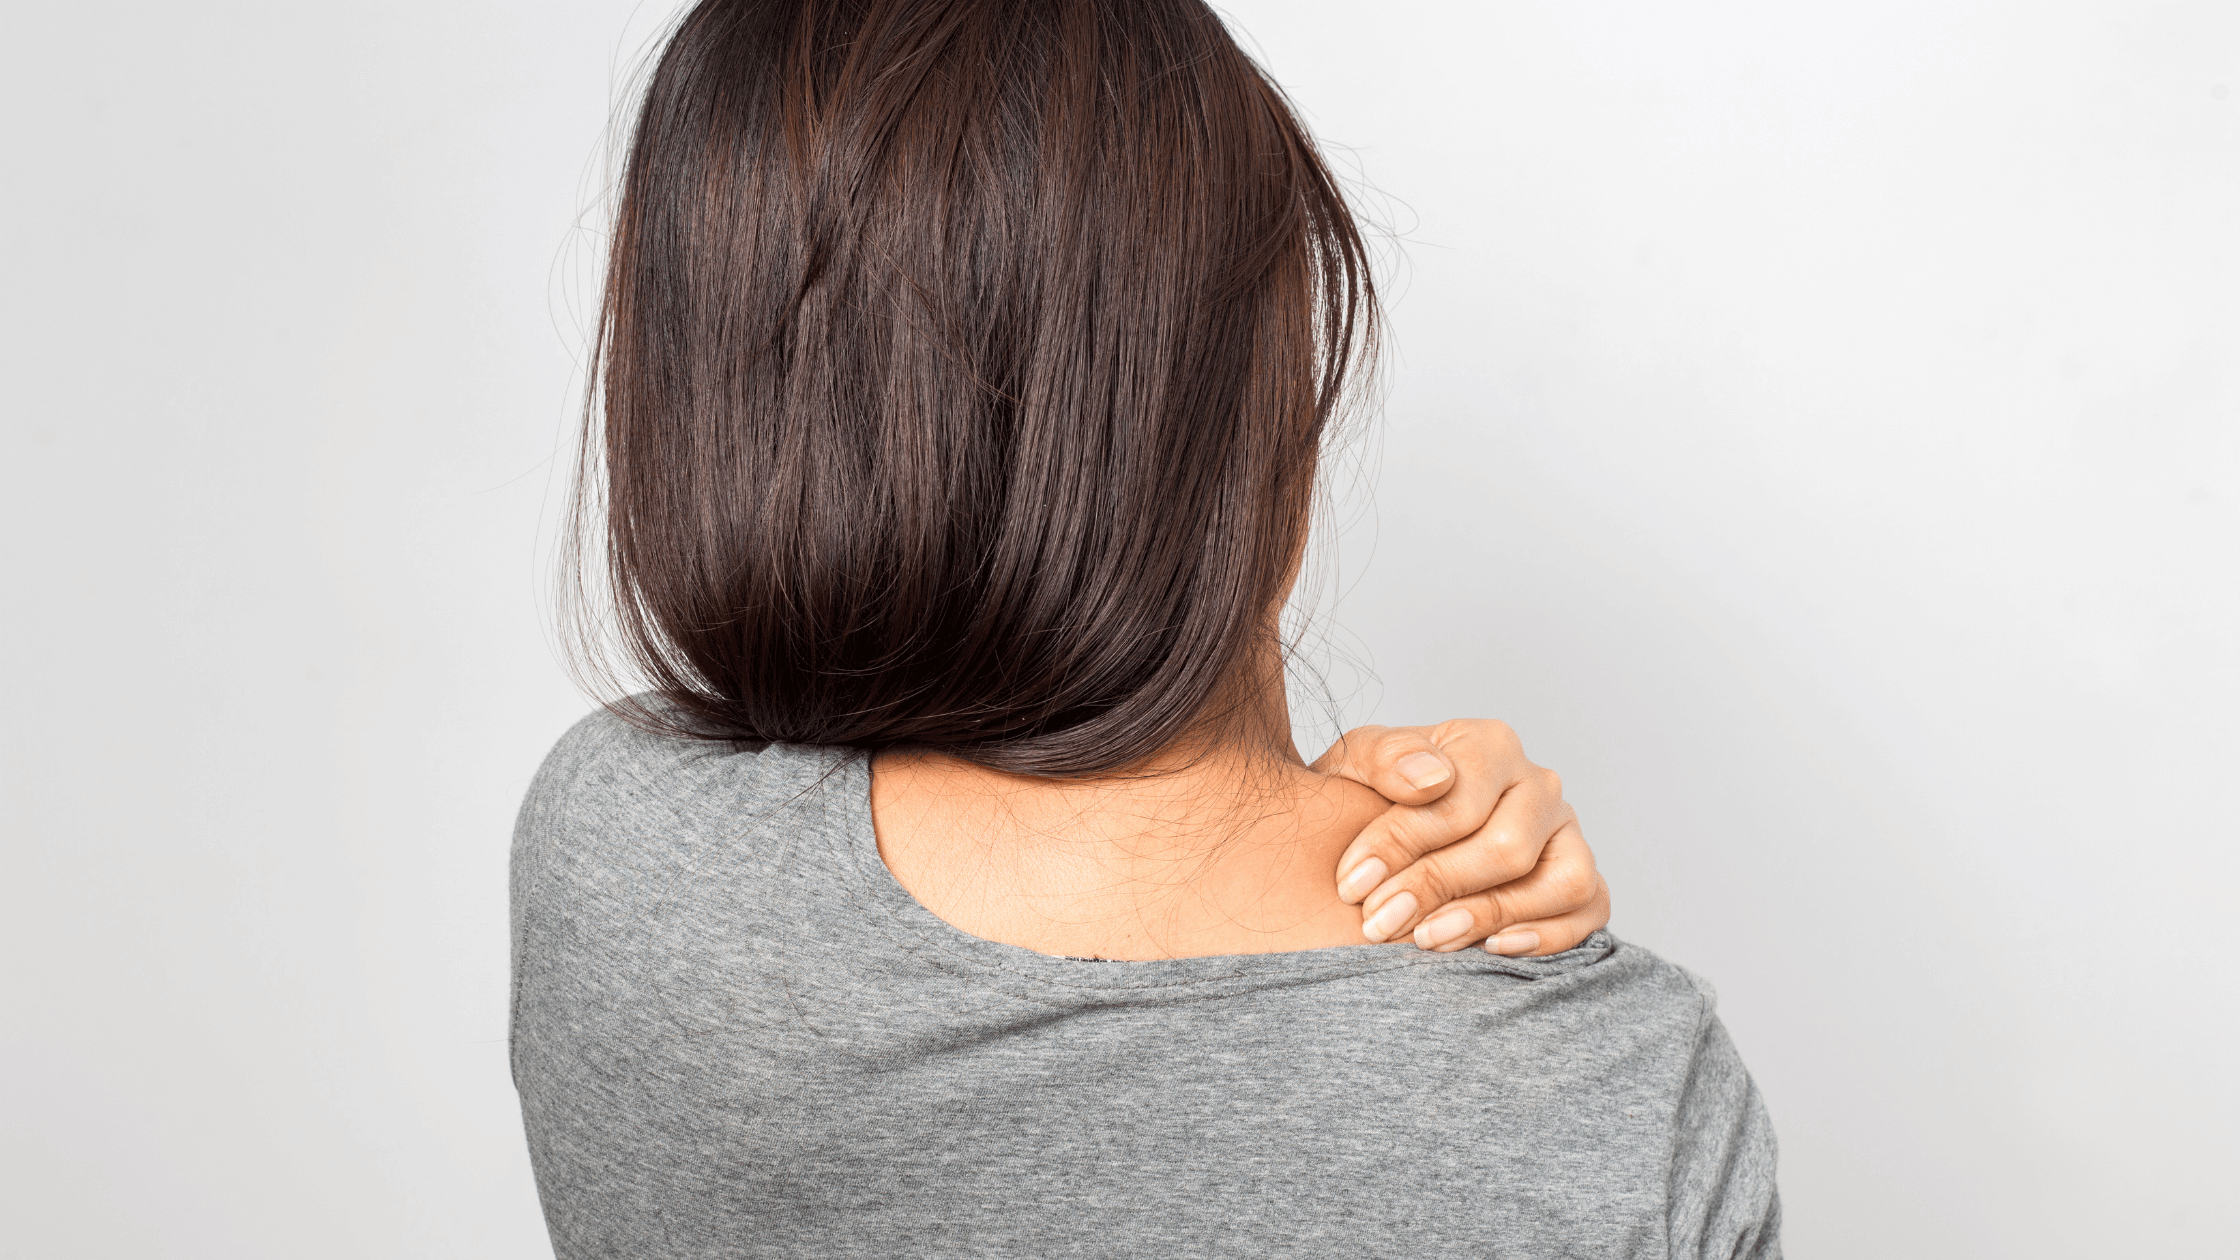 Stress can lead to tight muscles in the shoulders and back.